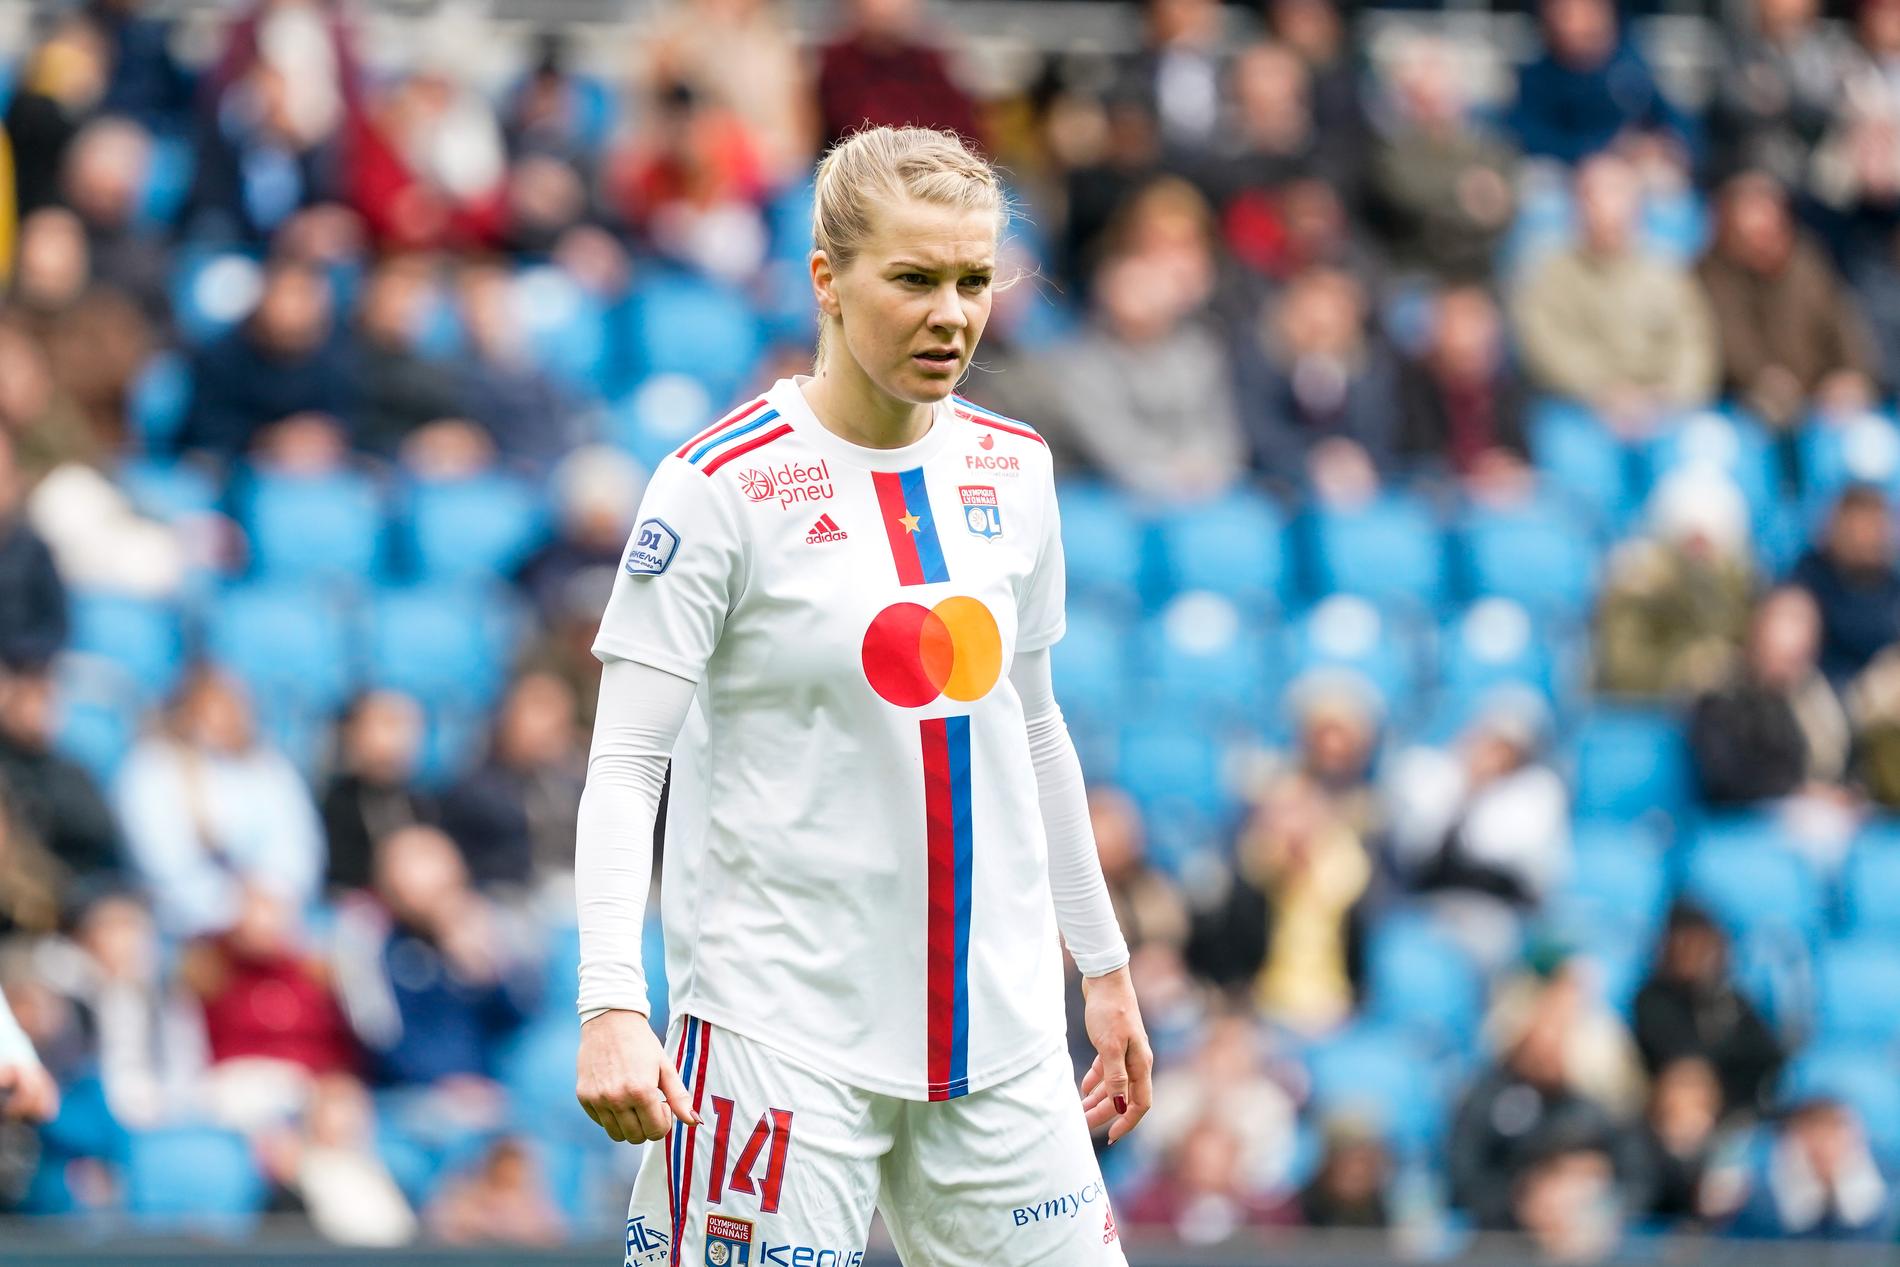 Numerous Injuries: Hegerberg has suffered from a number of injuries in recent years.  And now it looks like she's on her way back.  It bodes well for both Lyon and Norway. 